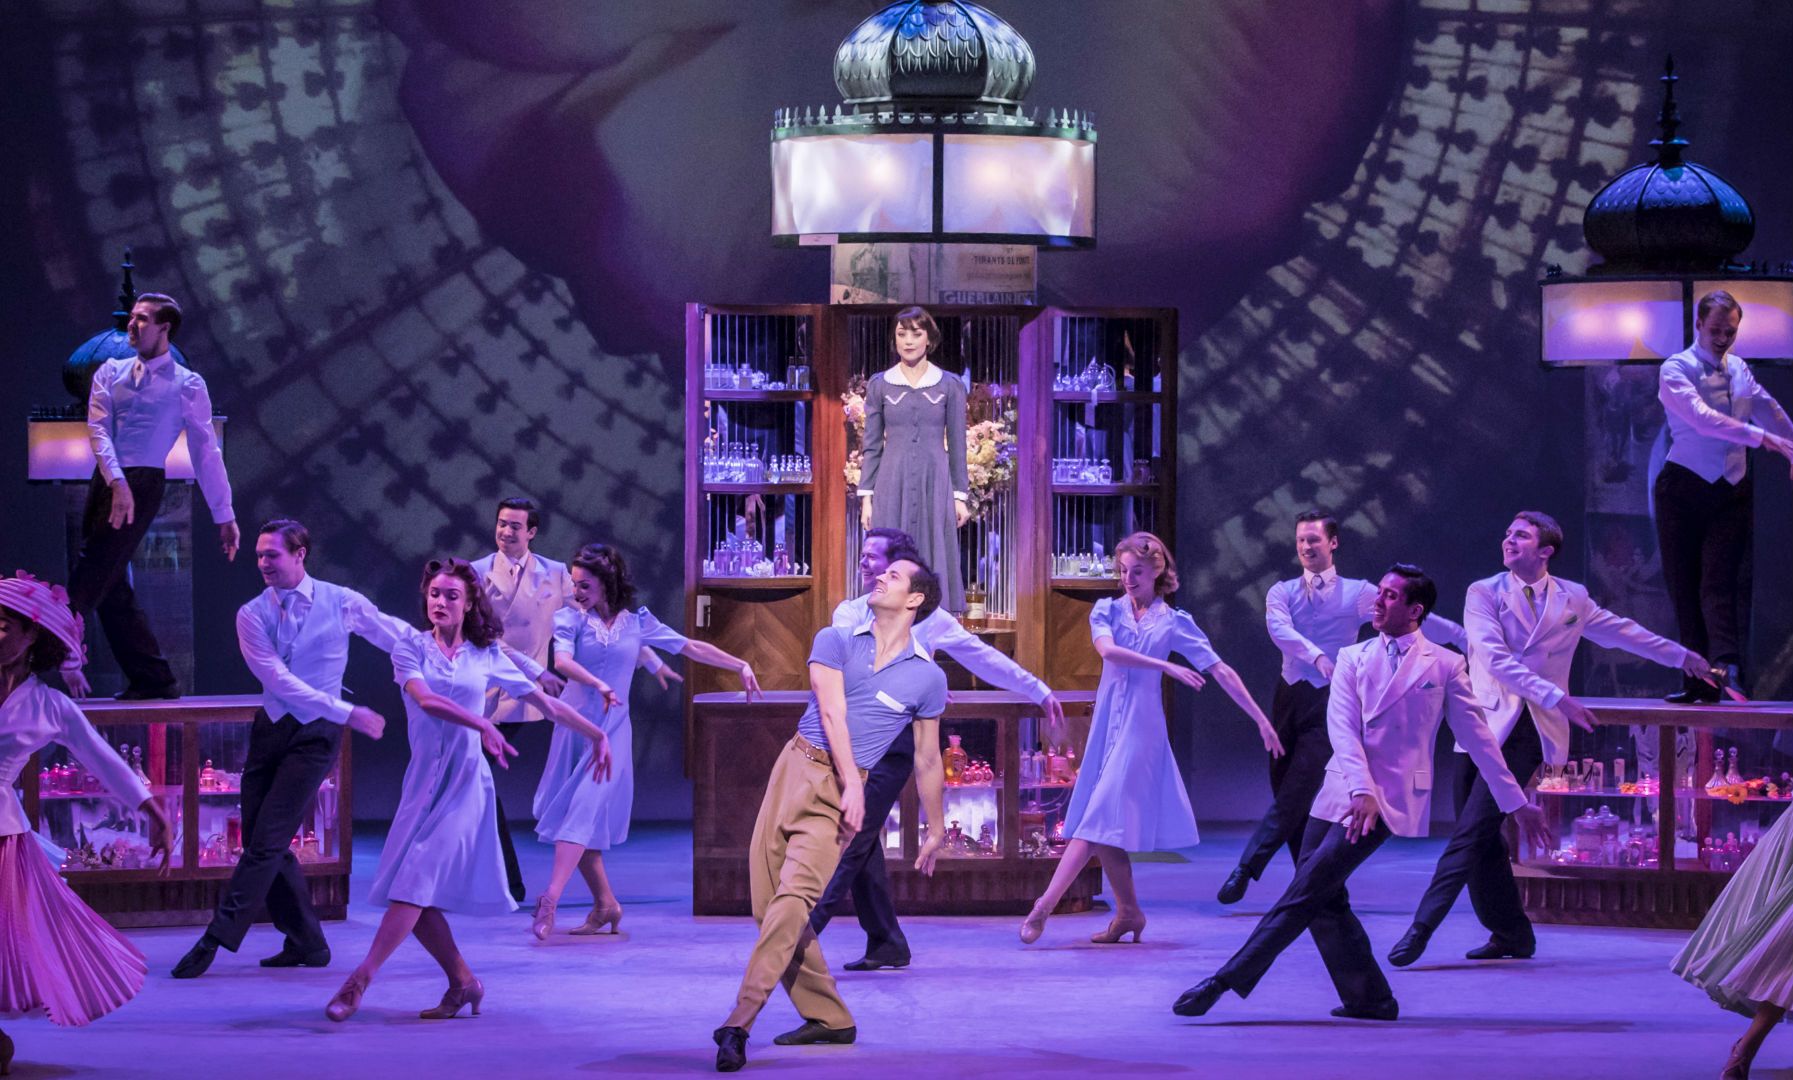 'An American in Paris' will be available to stream on BroadwayHD